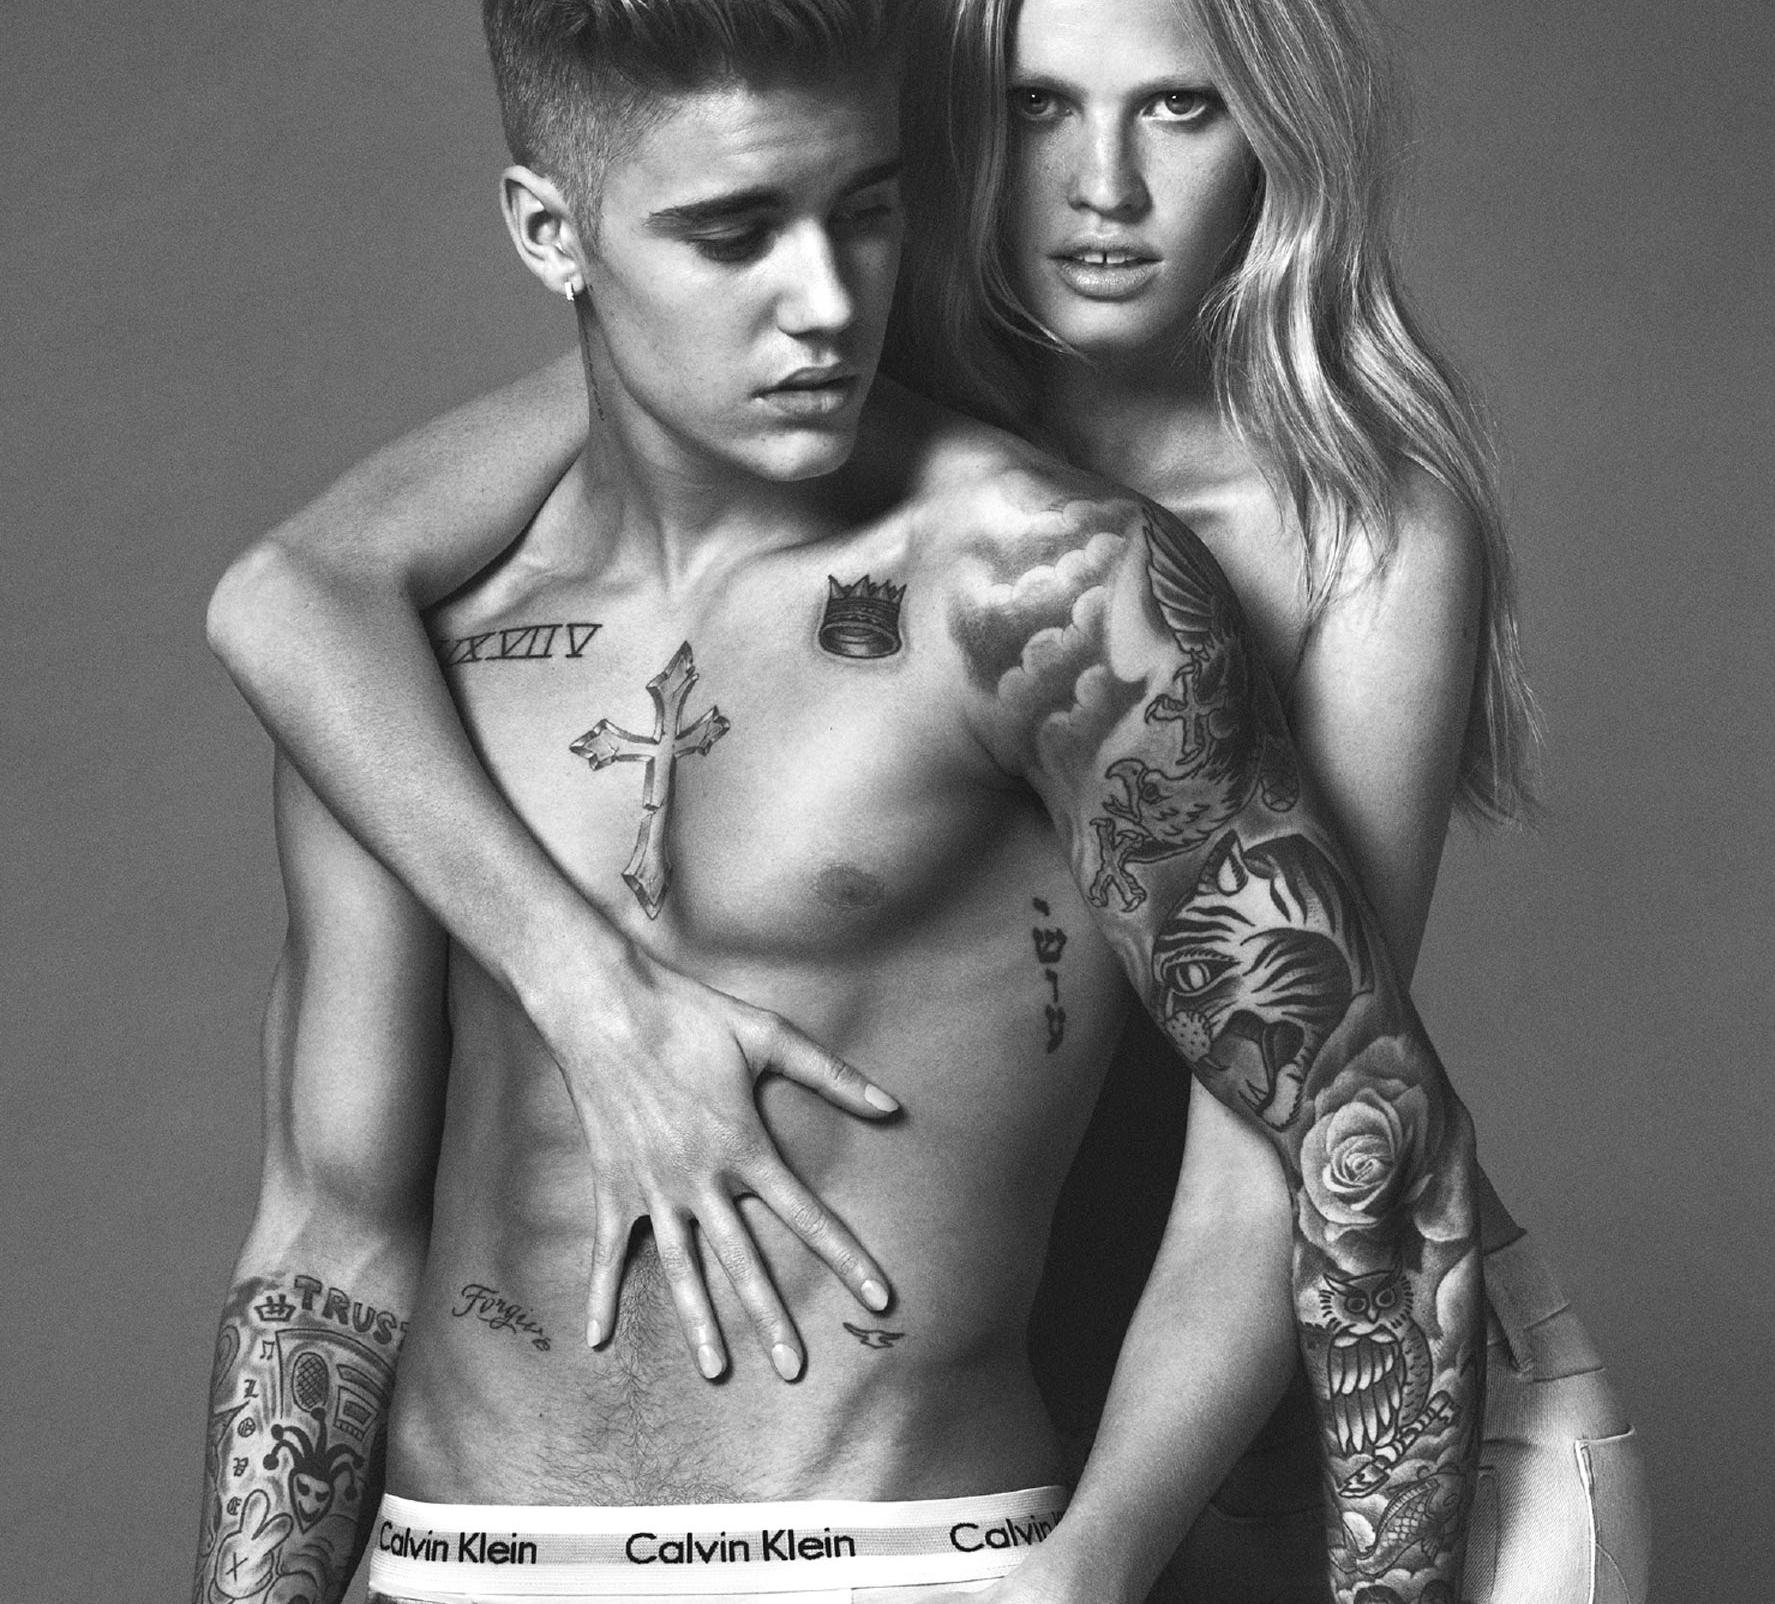 Justin Bieber's Body Photoshopped For Calvin Klein Ad? Photos And Video  Suggest Singer's Body Bulked Up Digitally